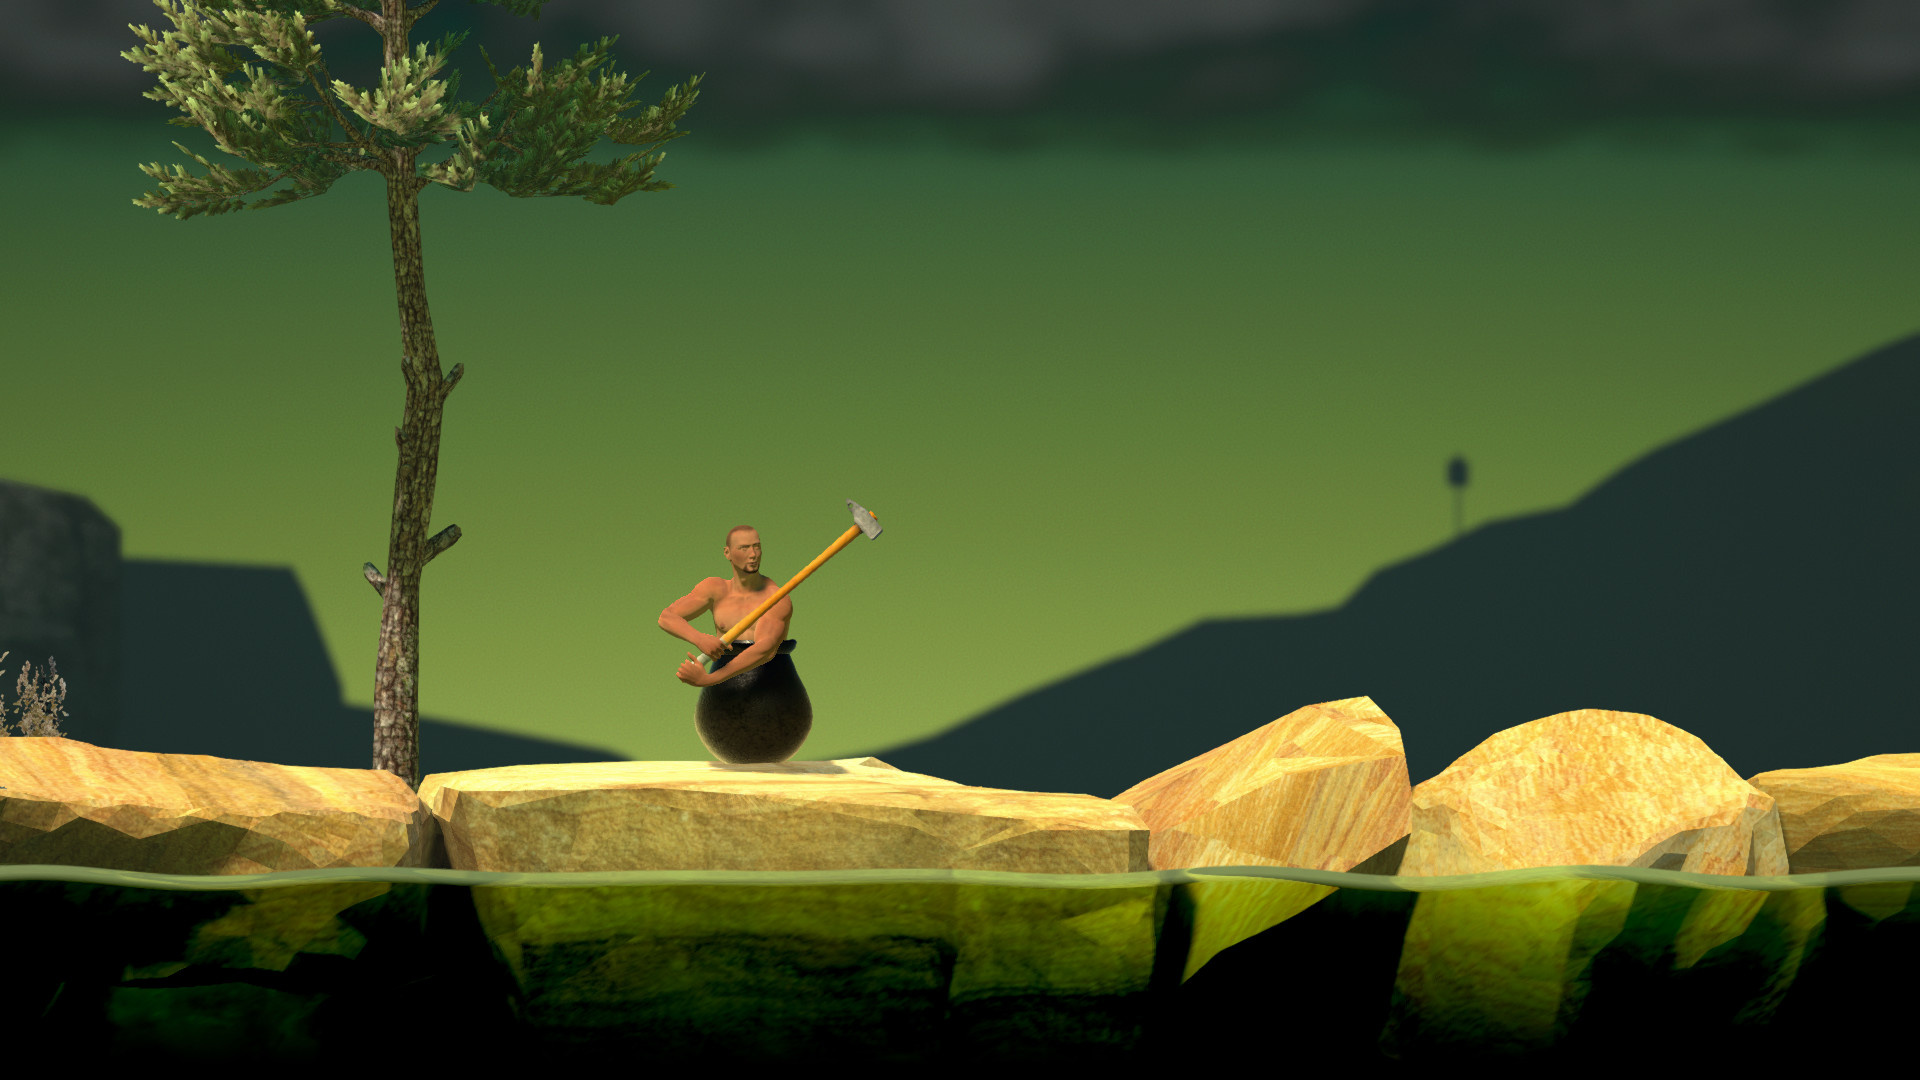 Getting Over It with Bennett Foddy Torrent Download - CroTorrents